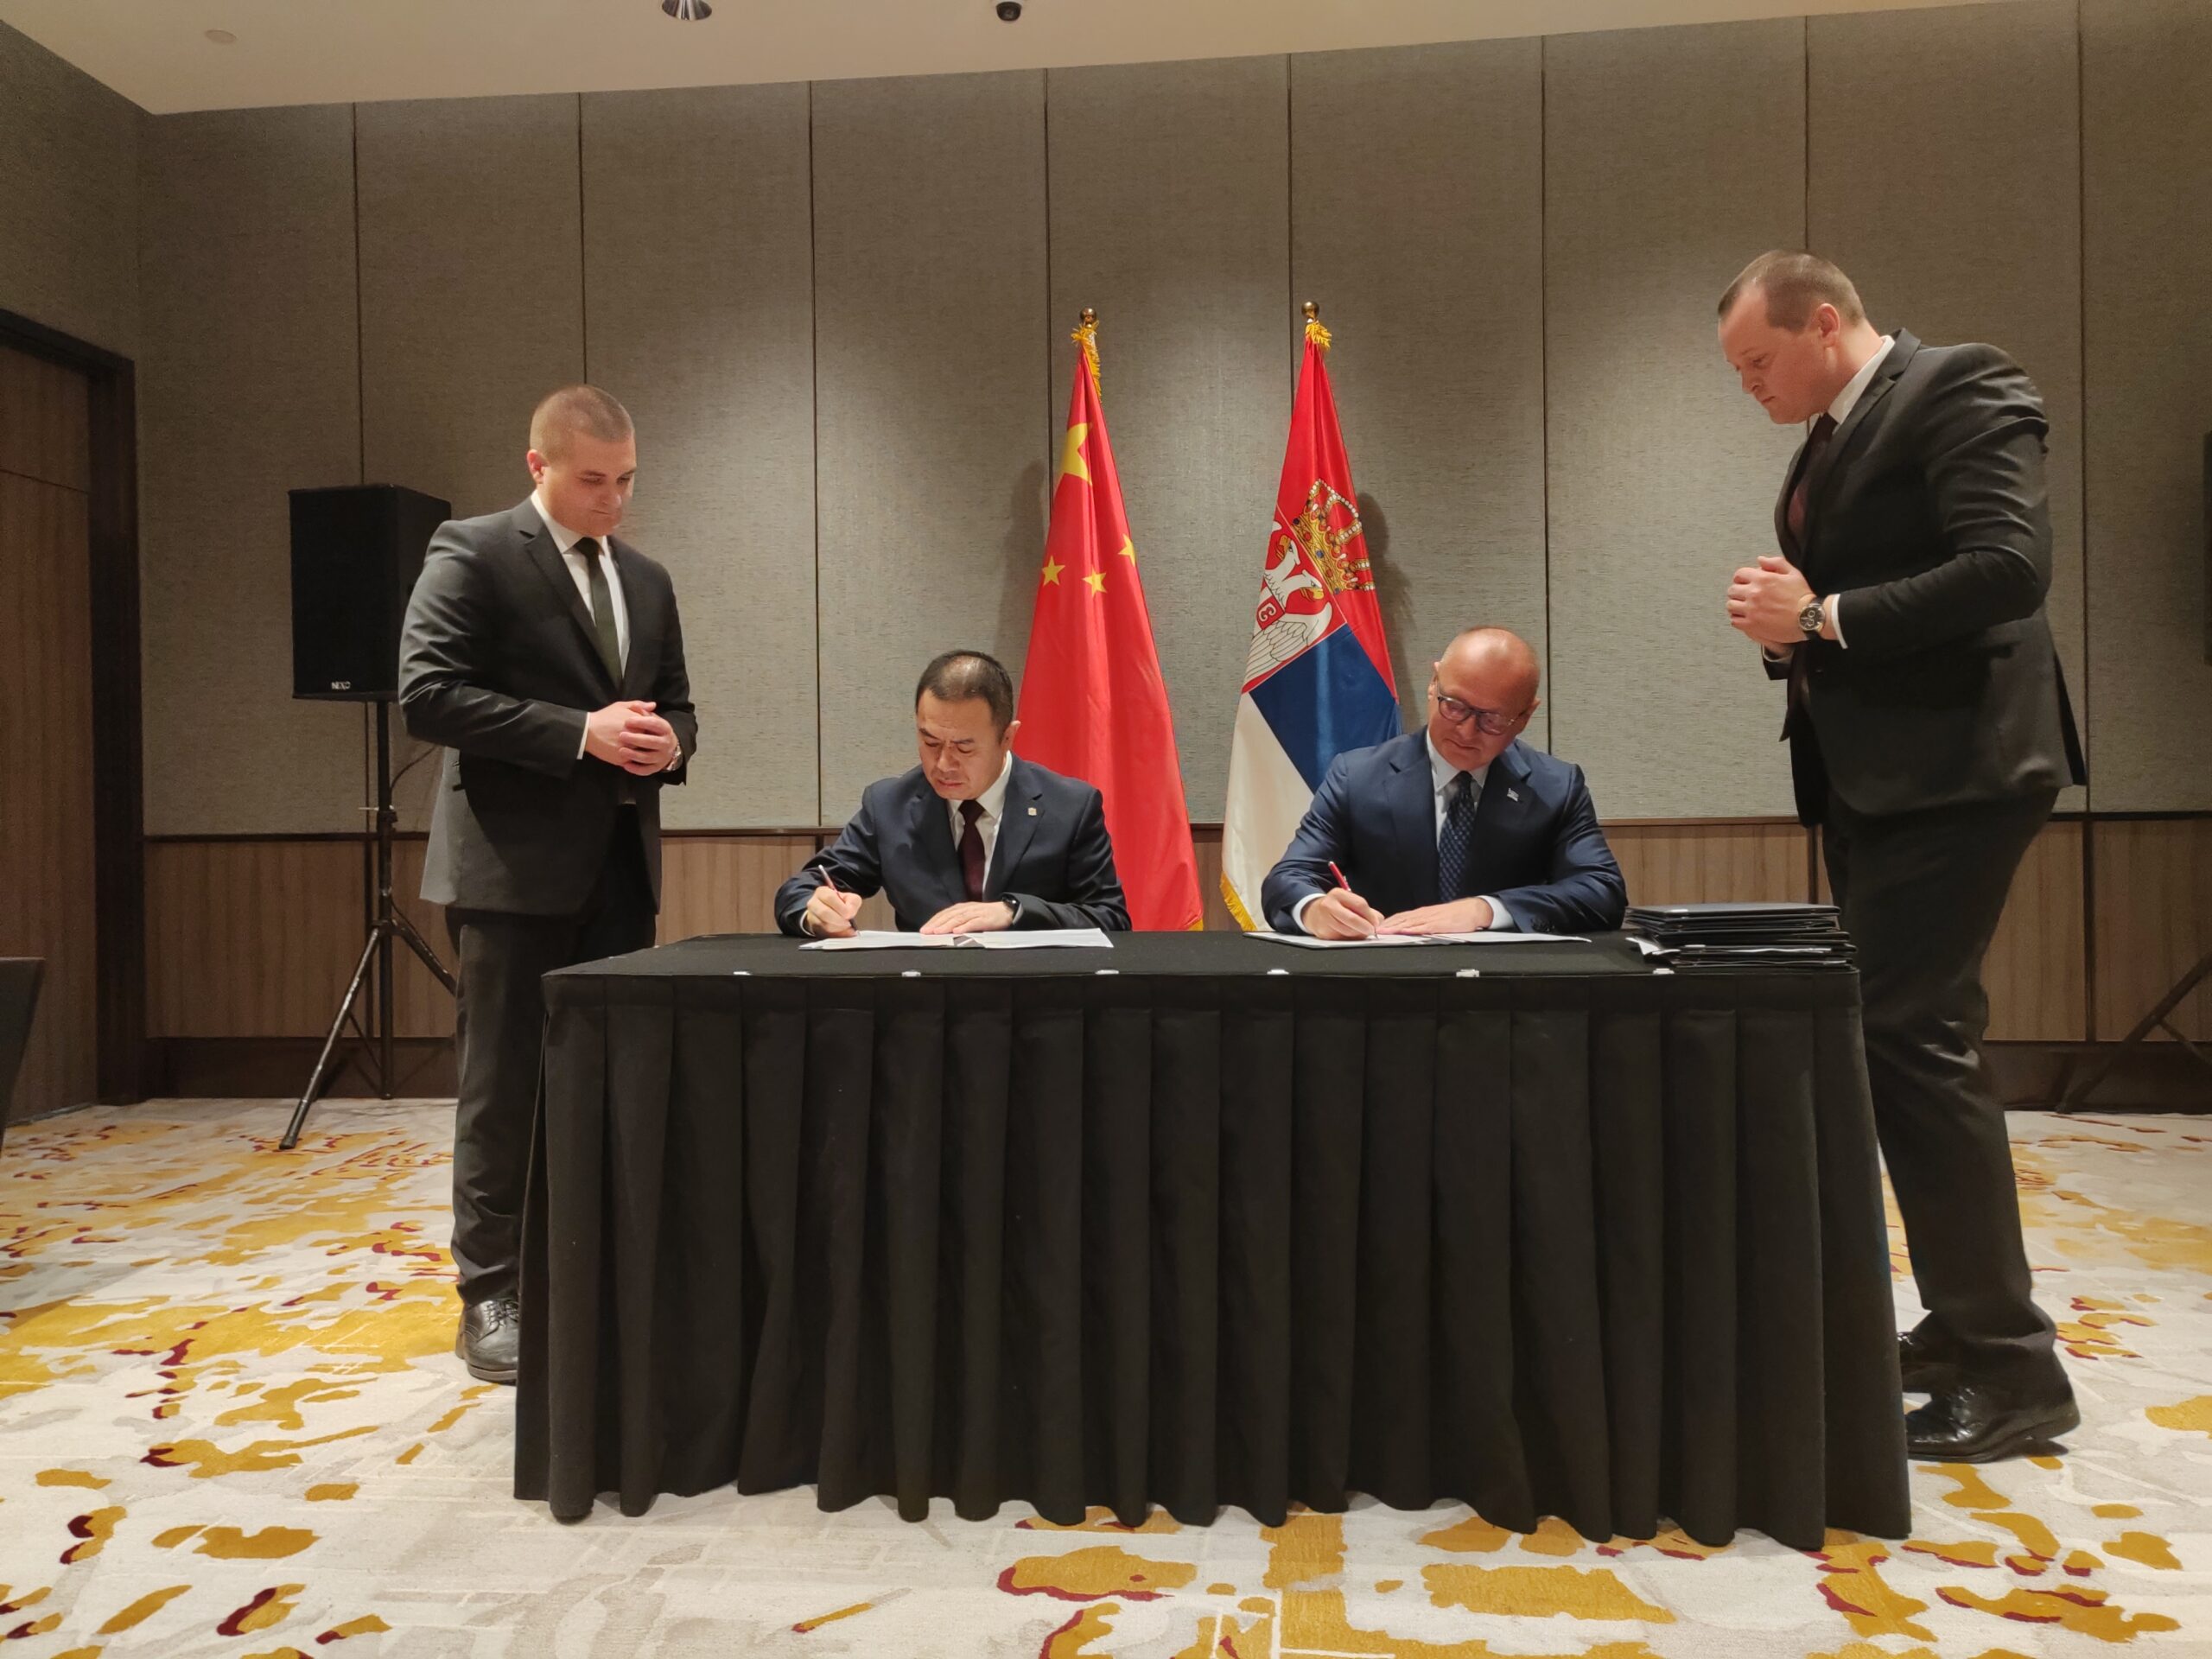 In October, CRRC officially signed a purchase agreement for high-speed EMU vehicles with Serbia’s Ministry of Construction, Transportation and Infrastructure